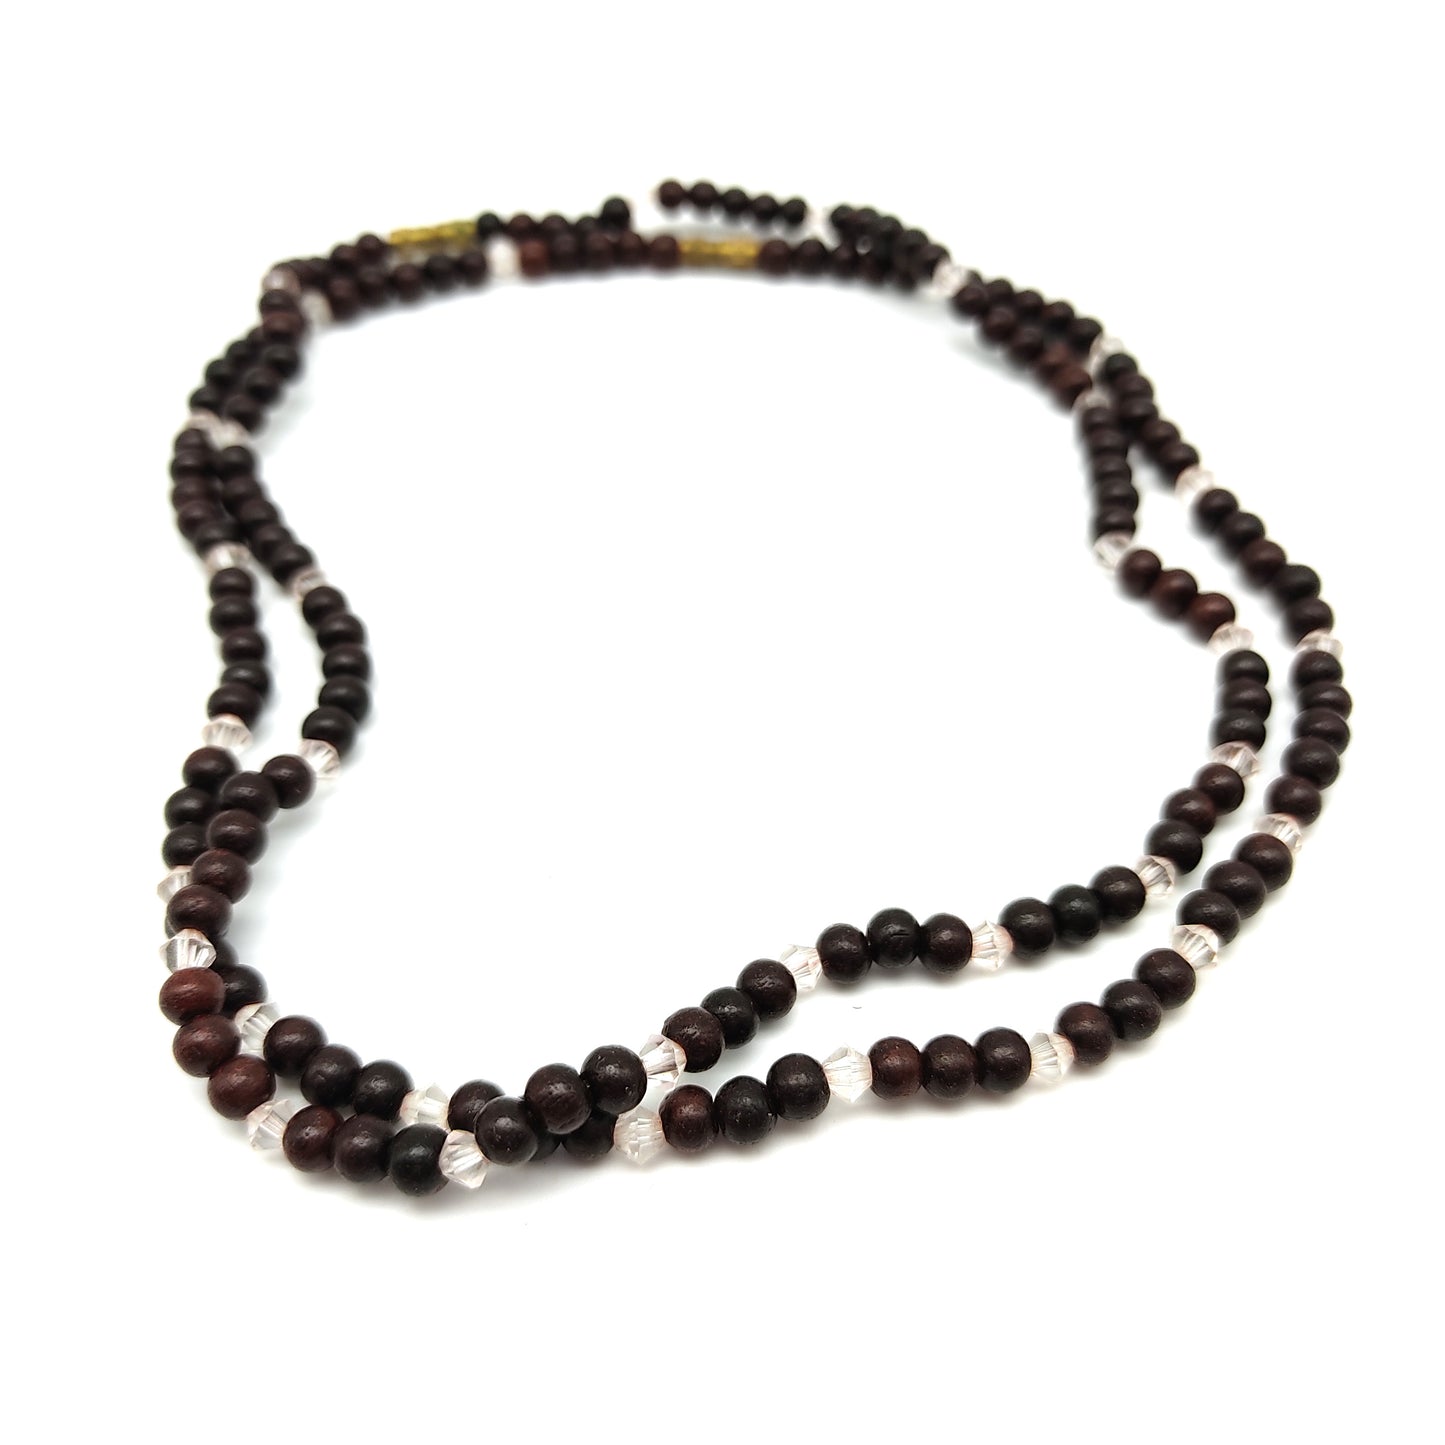 Necklace Rosewood and Clear Beads Decorative Necklace Choker 7"   Metal Clasp